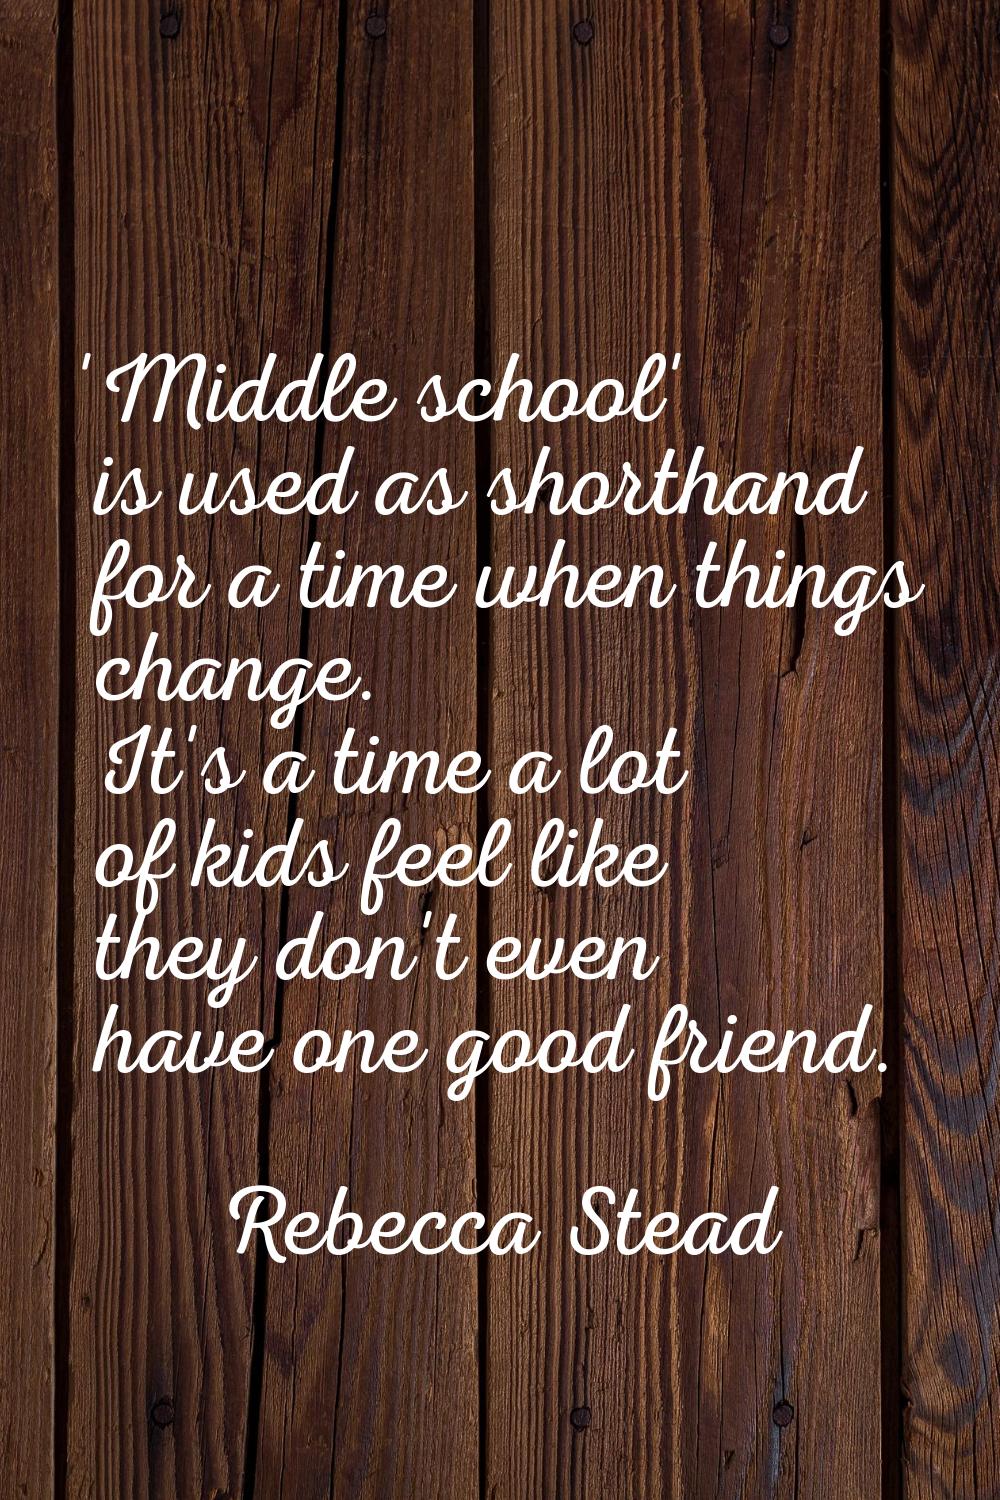 'Middle school' is used as shorthand for a time when things change. It's a time a lot of kids feel 